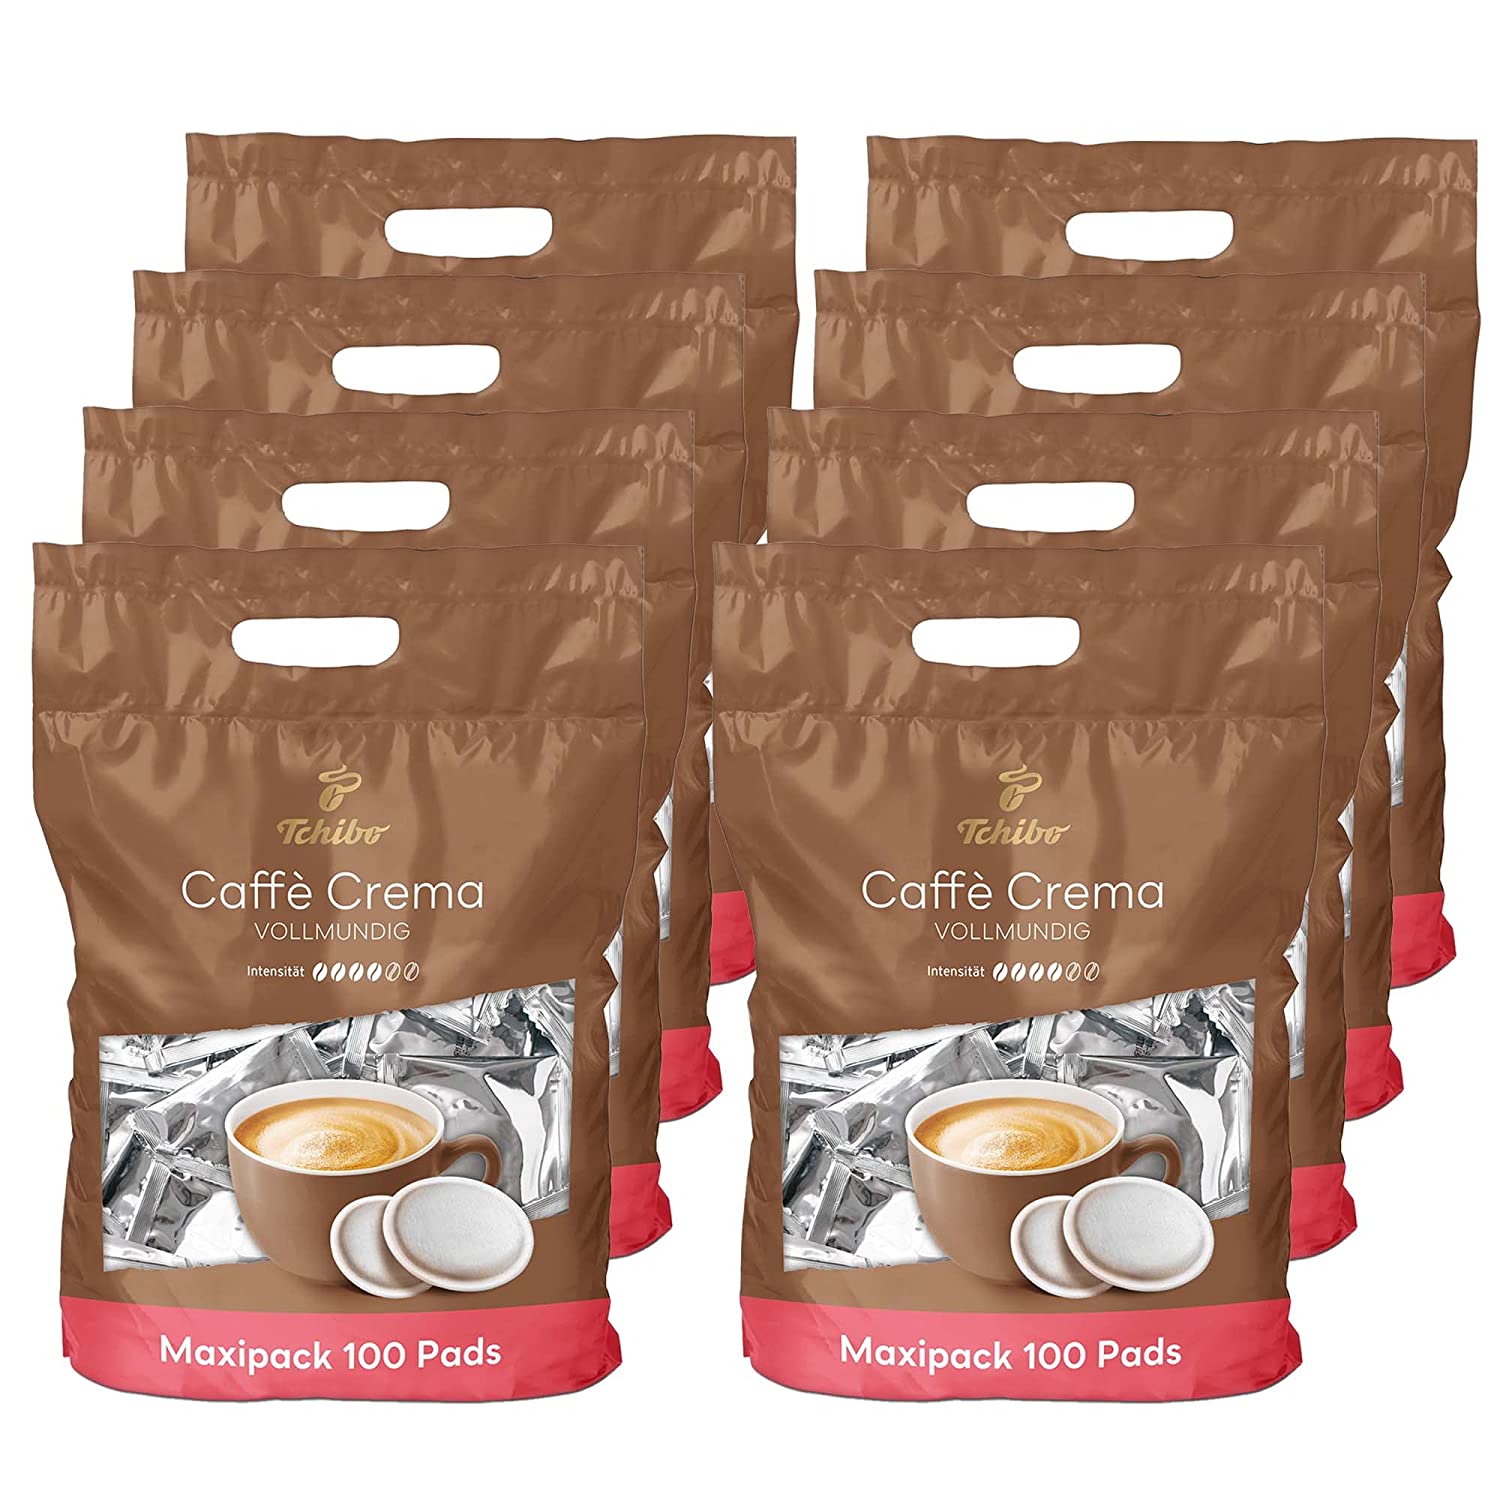 Tchibo Maxipack, Caffè Crema full-bodied, 800 pieces – 8x 100 pads (coffee, balanced and full-bodied), sustainable, suitable for Senseo machines